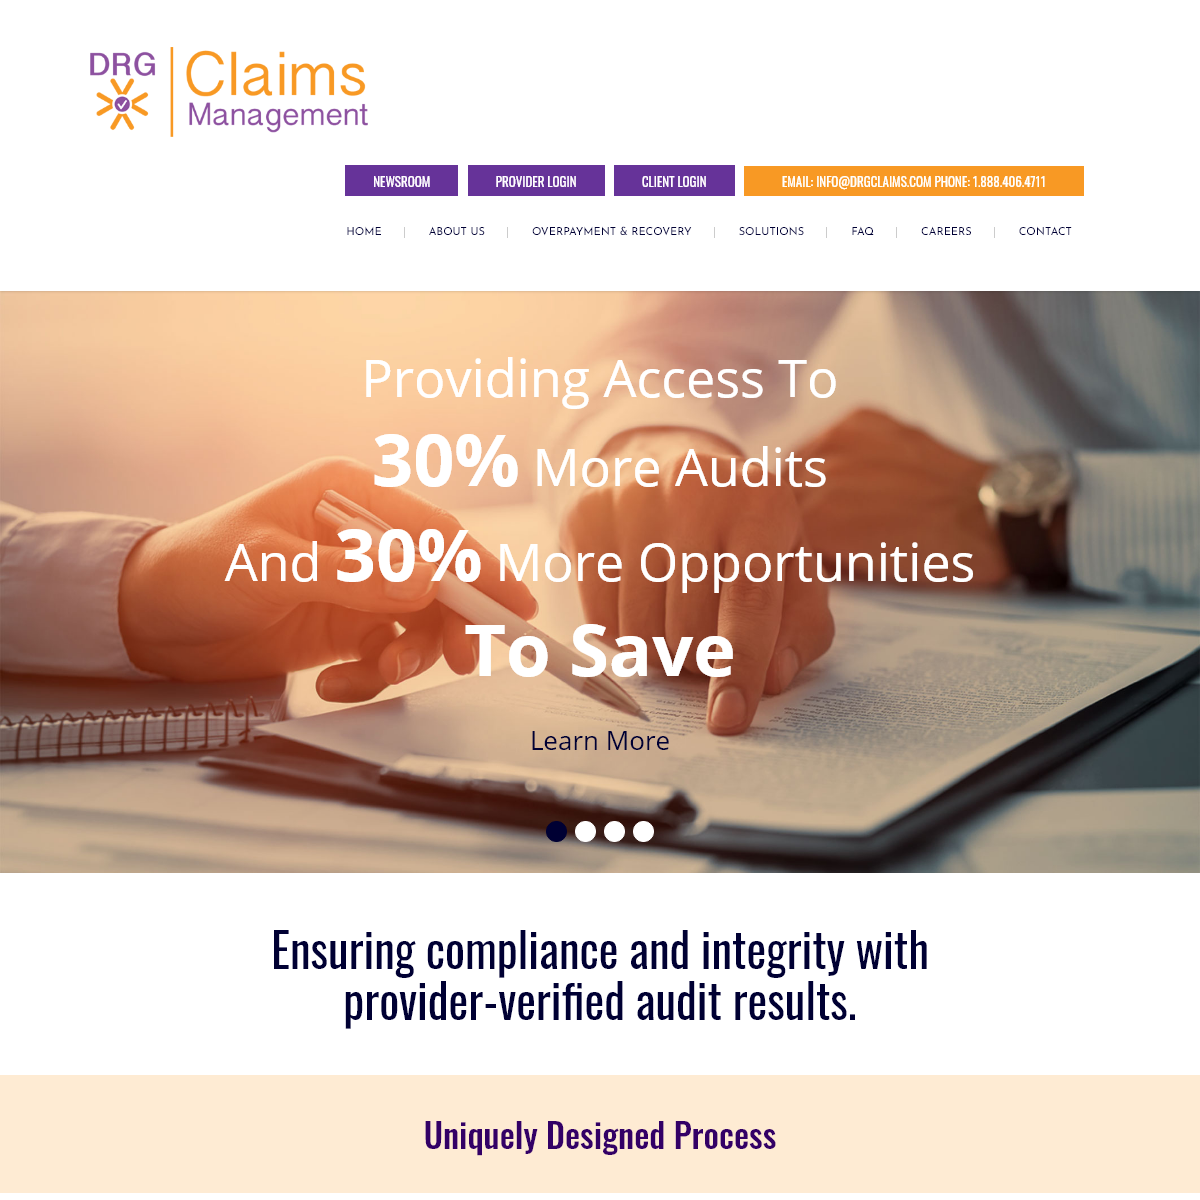 A complete backup of drgclaims.com